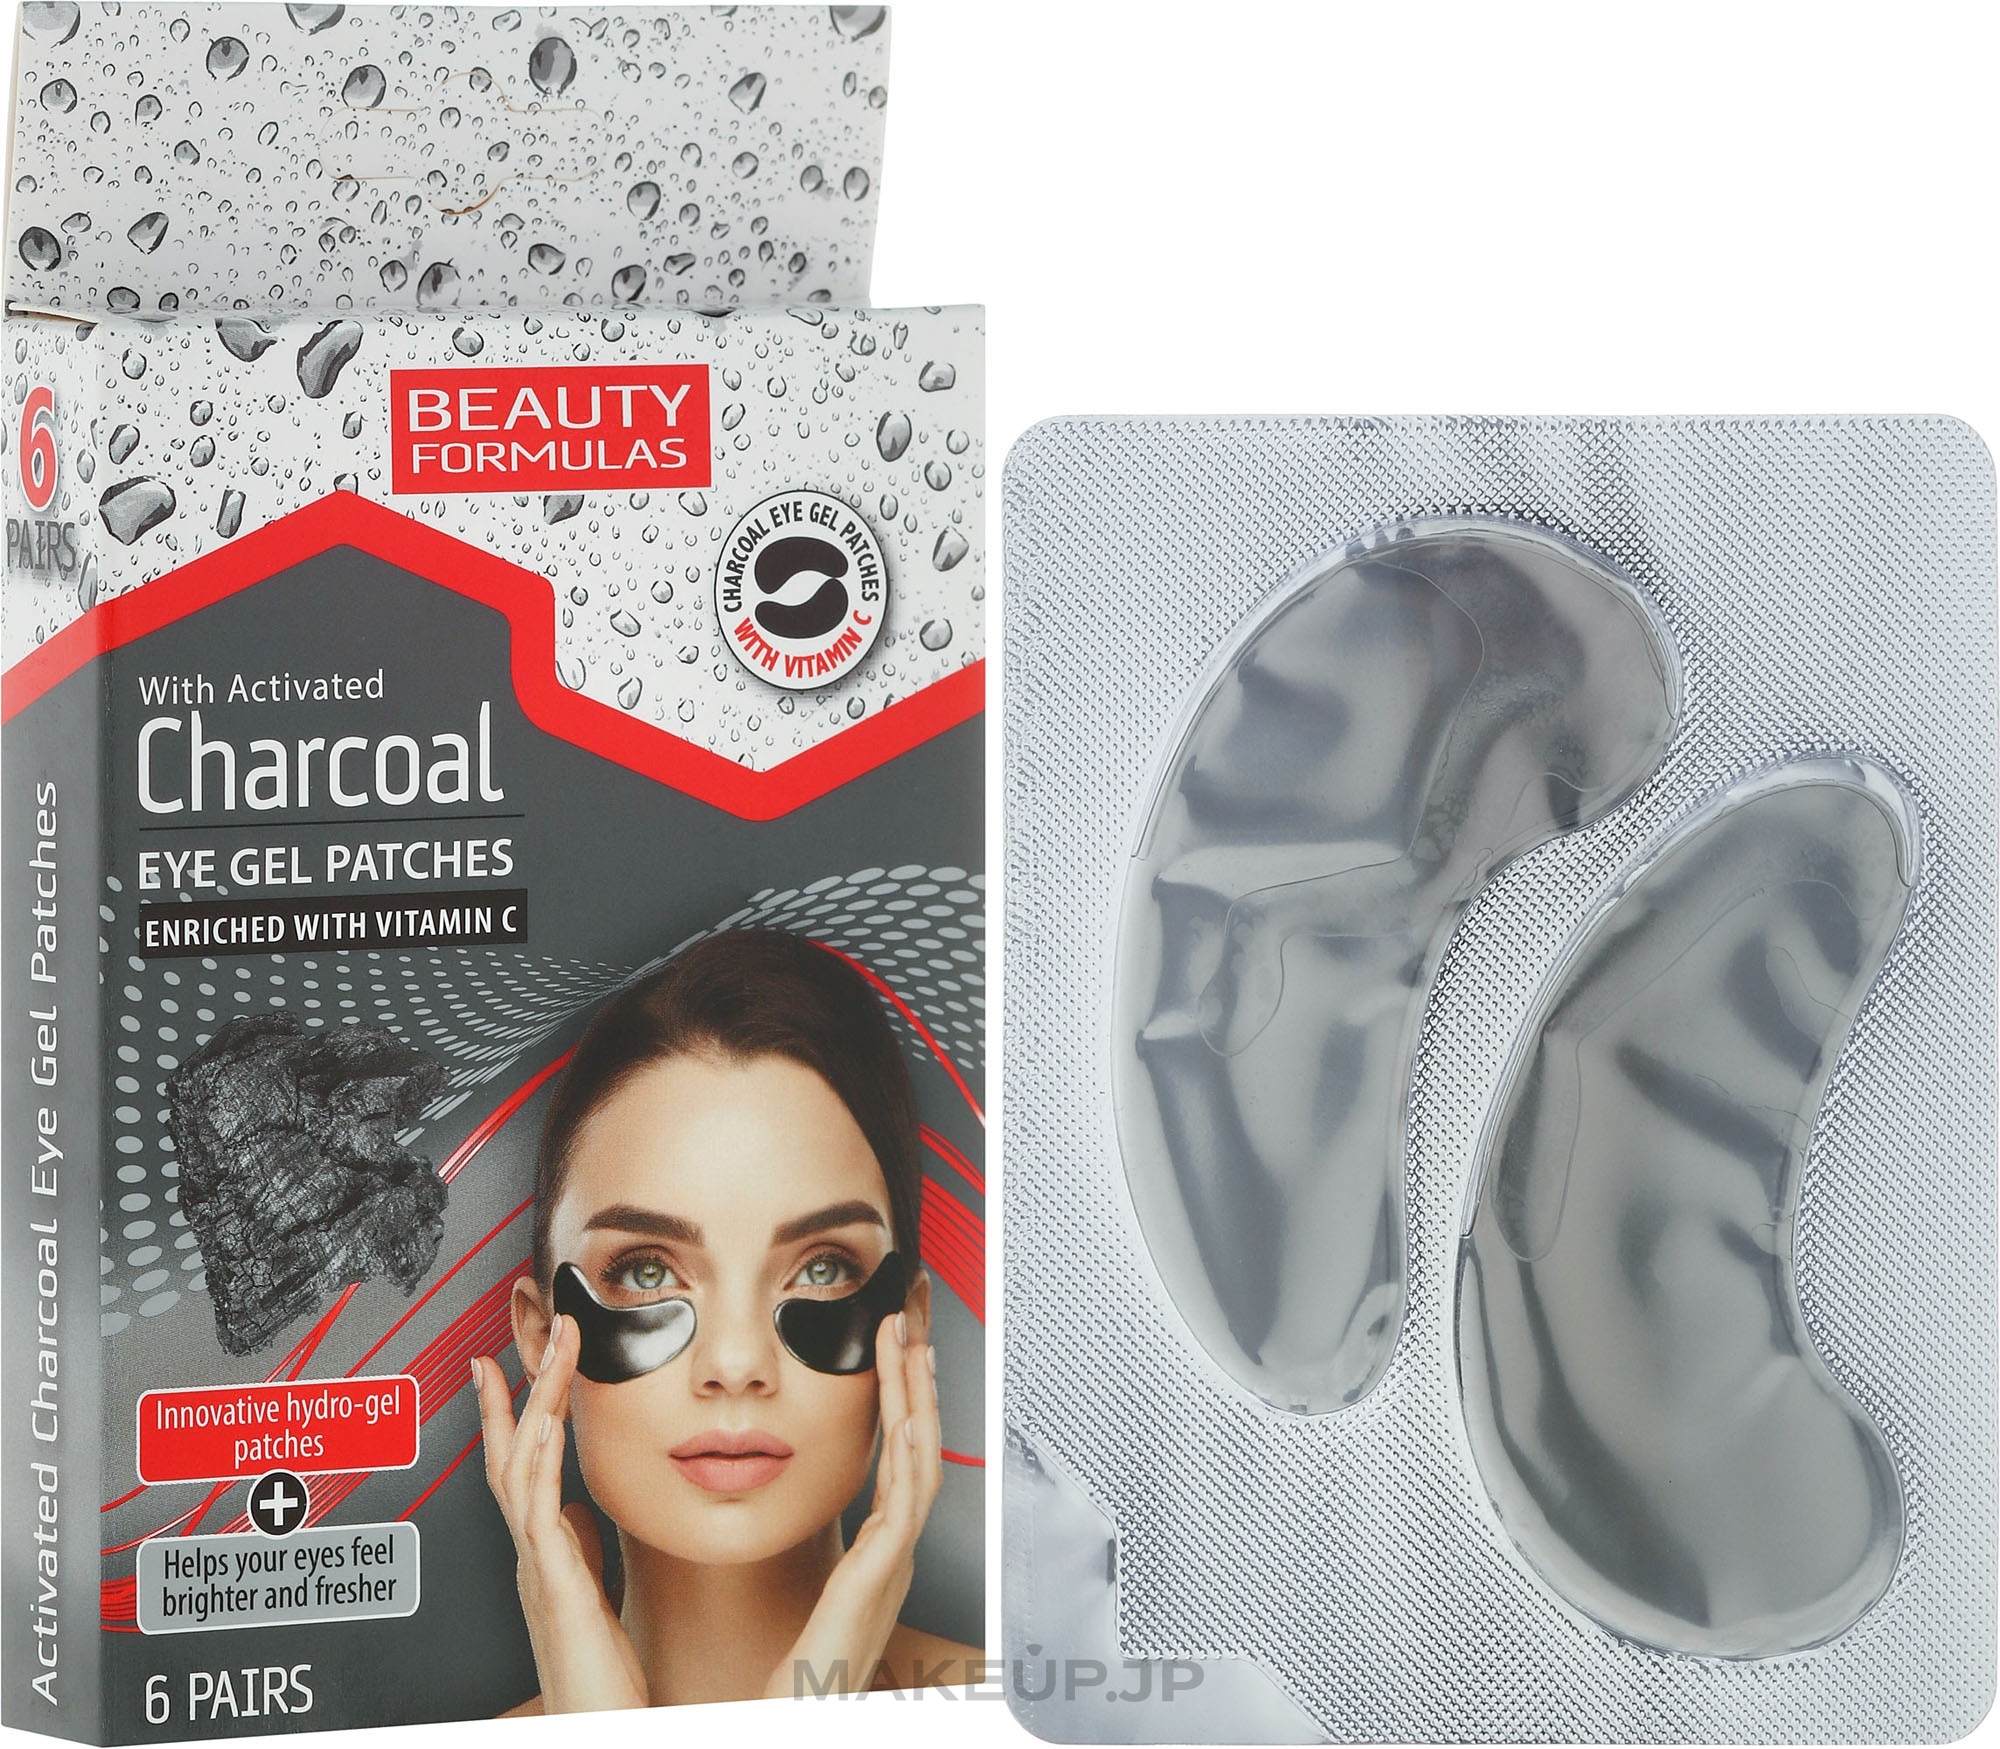 Activated Charcoal Patches - Beauty Formulas Charcoal Eye Gel Patches — photo 6 szt.